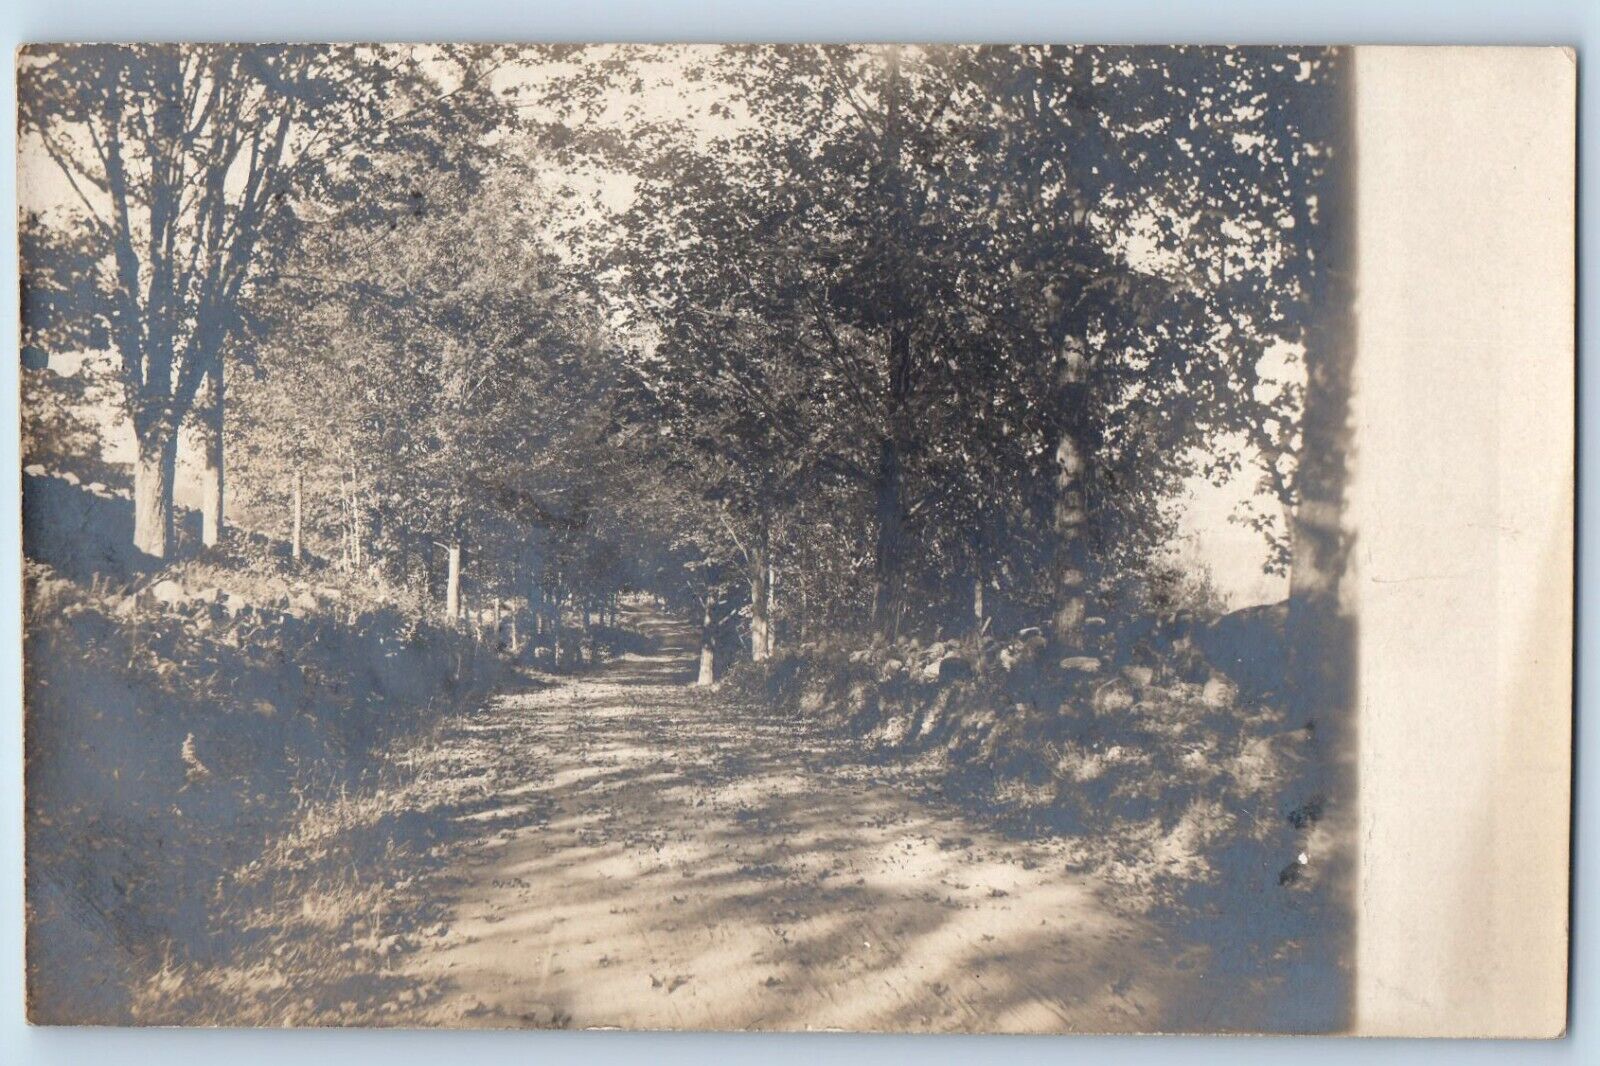 Antrim New Hampshire NH Postcard RPPC Photo Dirt Road And Trees 1910 Antique